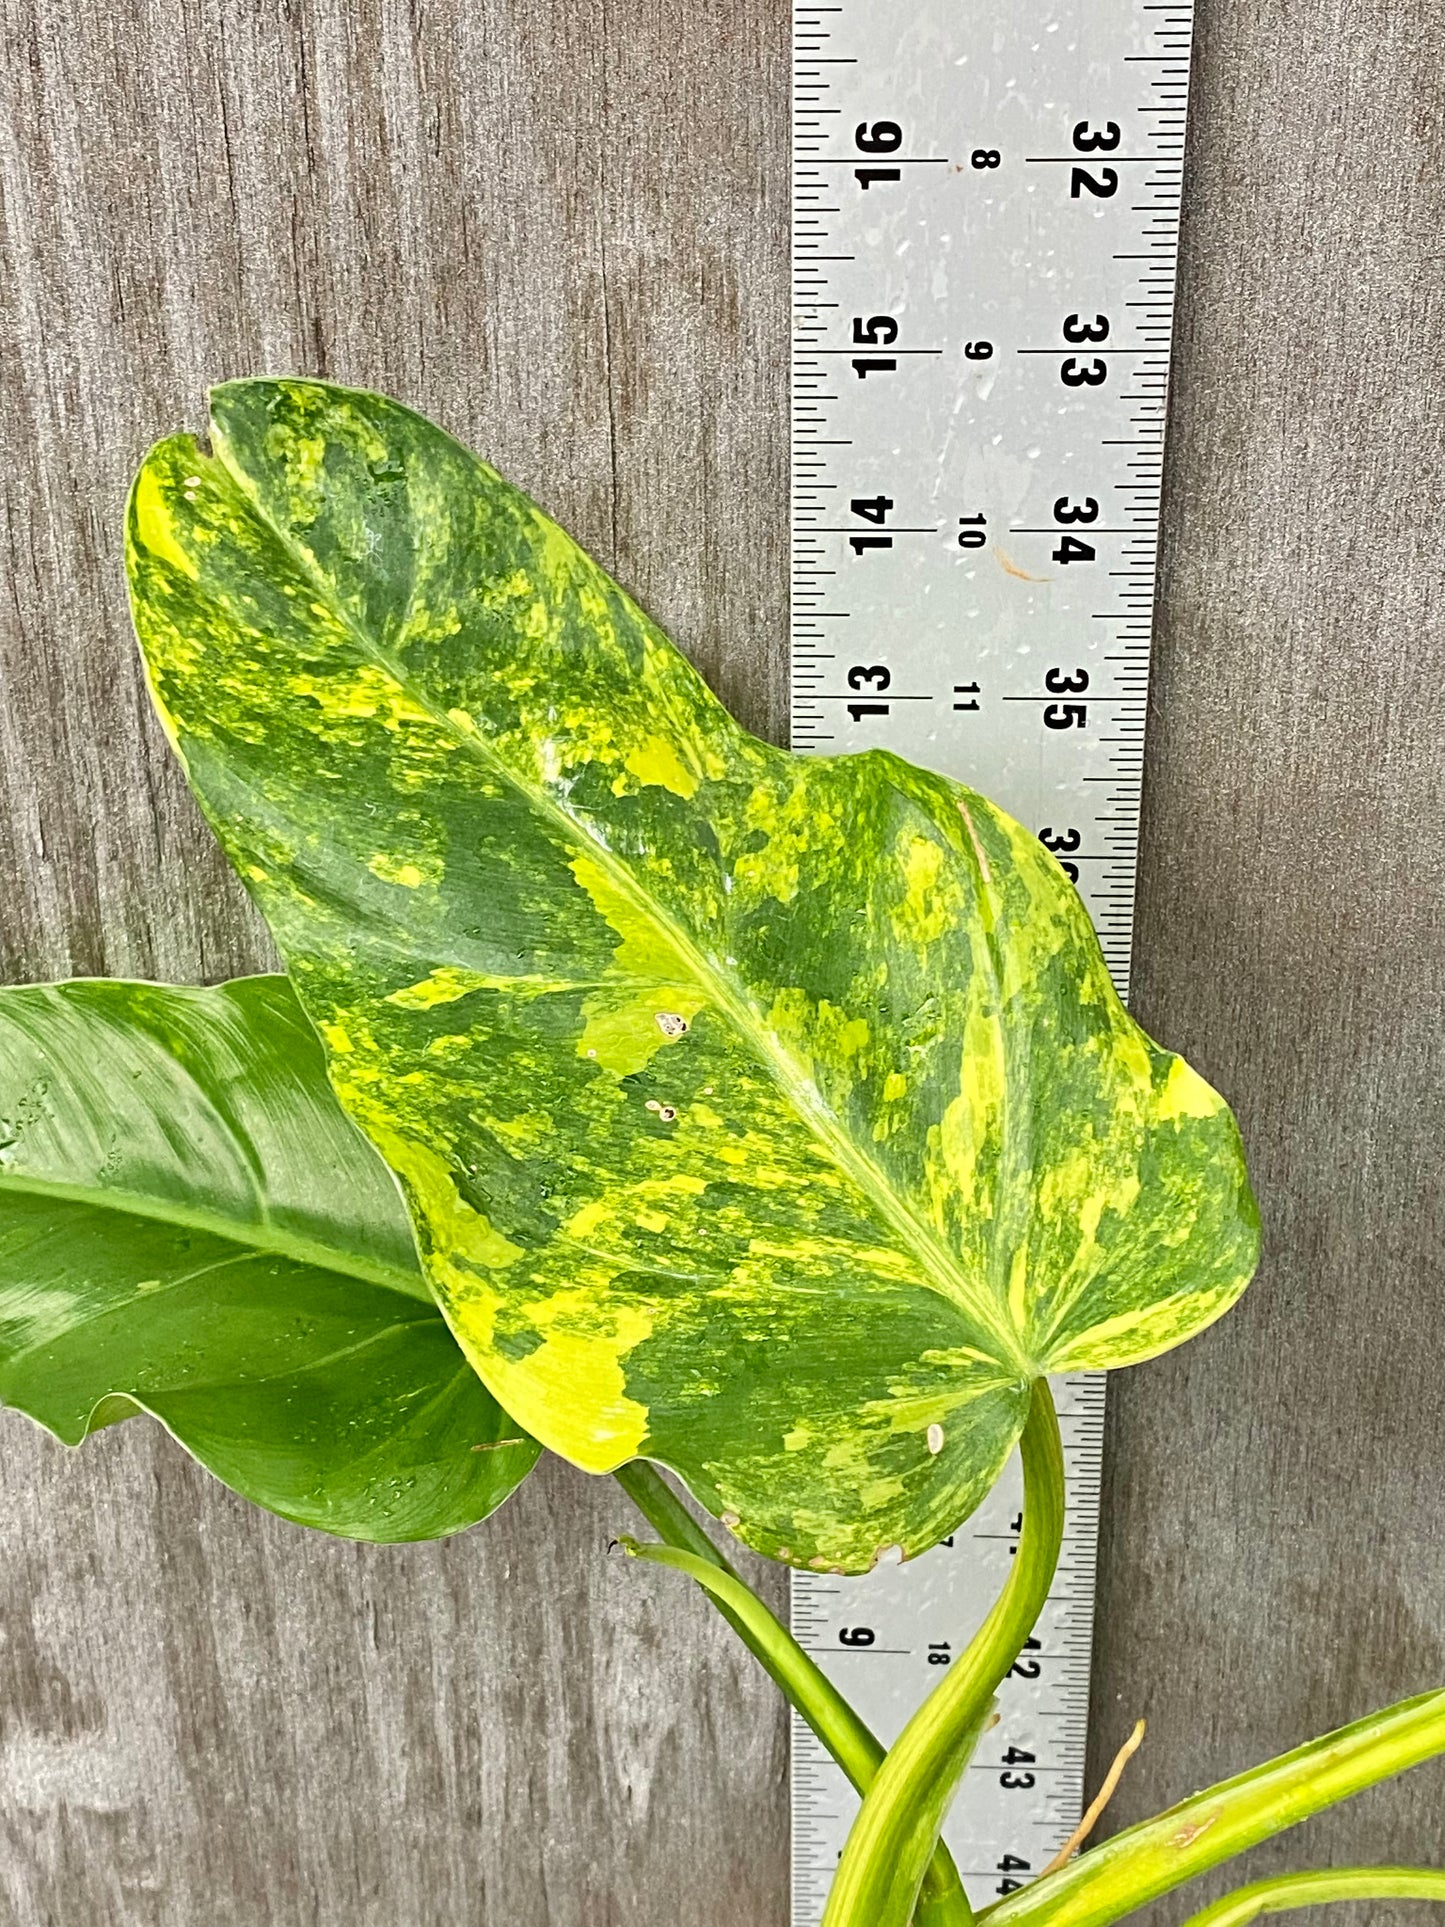 Variegated Philodendron Domesticum